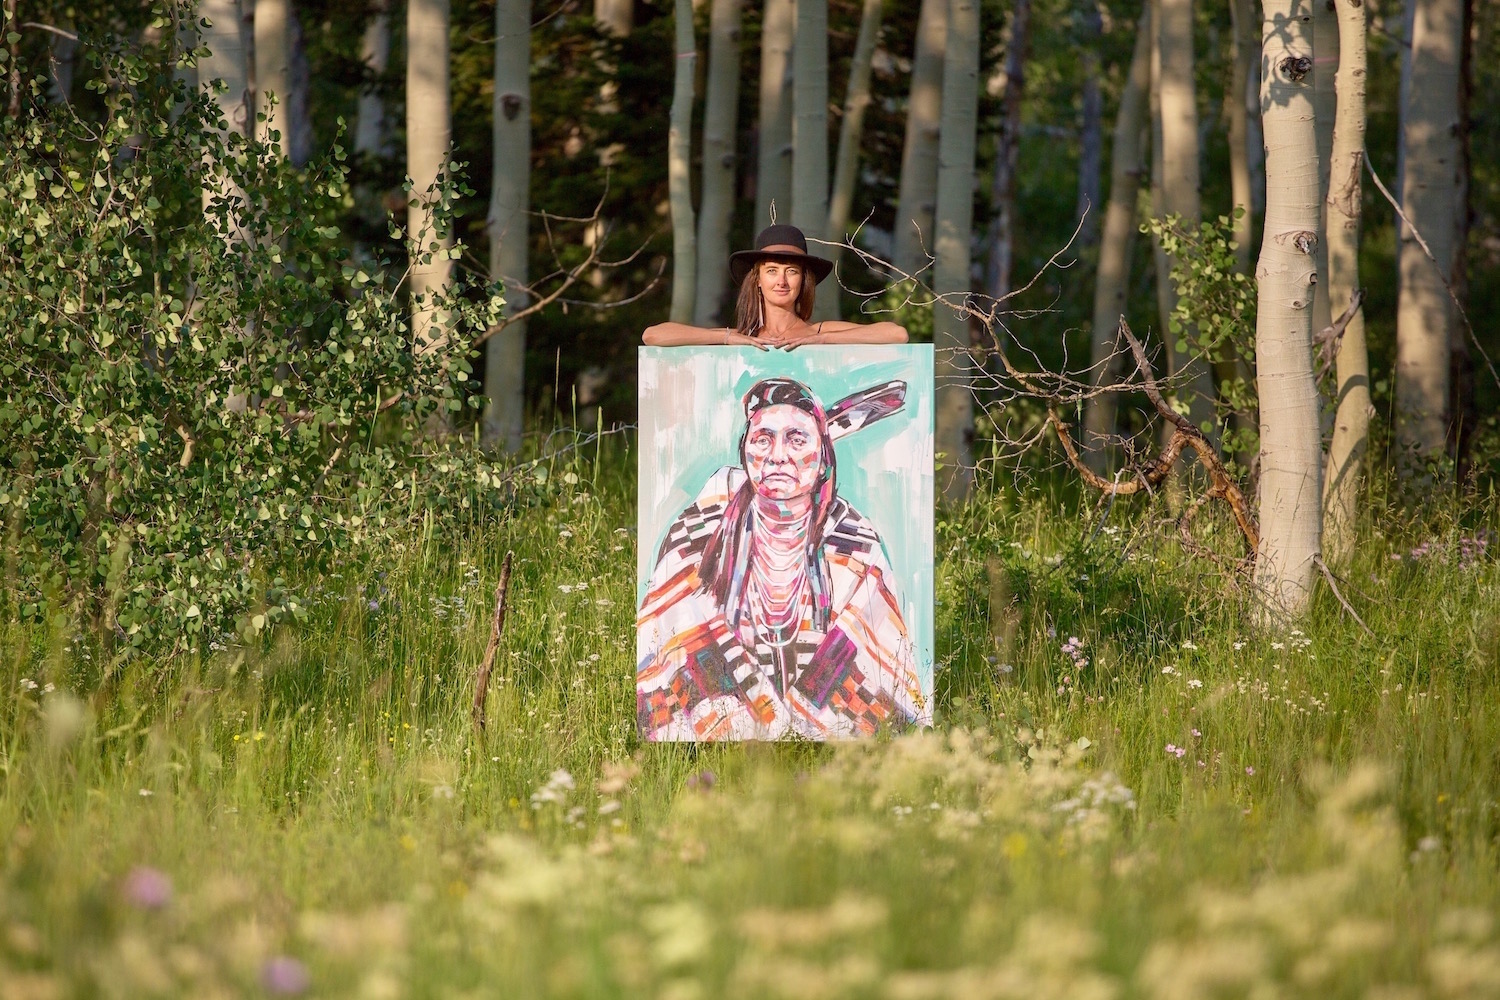 Dunn with Chief Joseph painting. Chief Joseph is known for valiantly resisting the removal of his people from their sacred land in Wallowa Valley (now northeastern Oregon) – Resistance Series. Credit: Mars Ramp